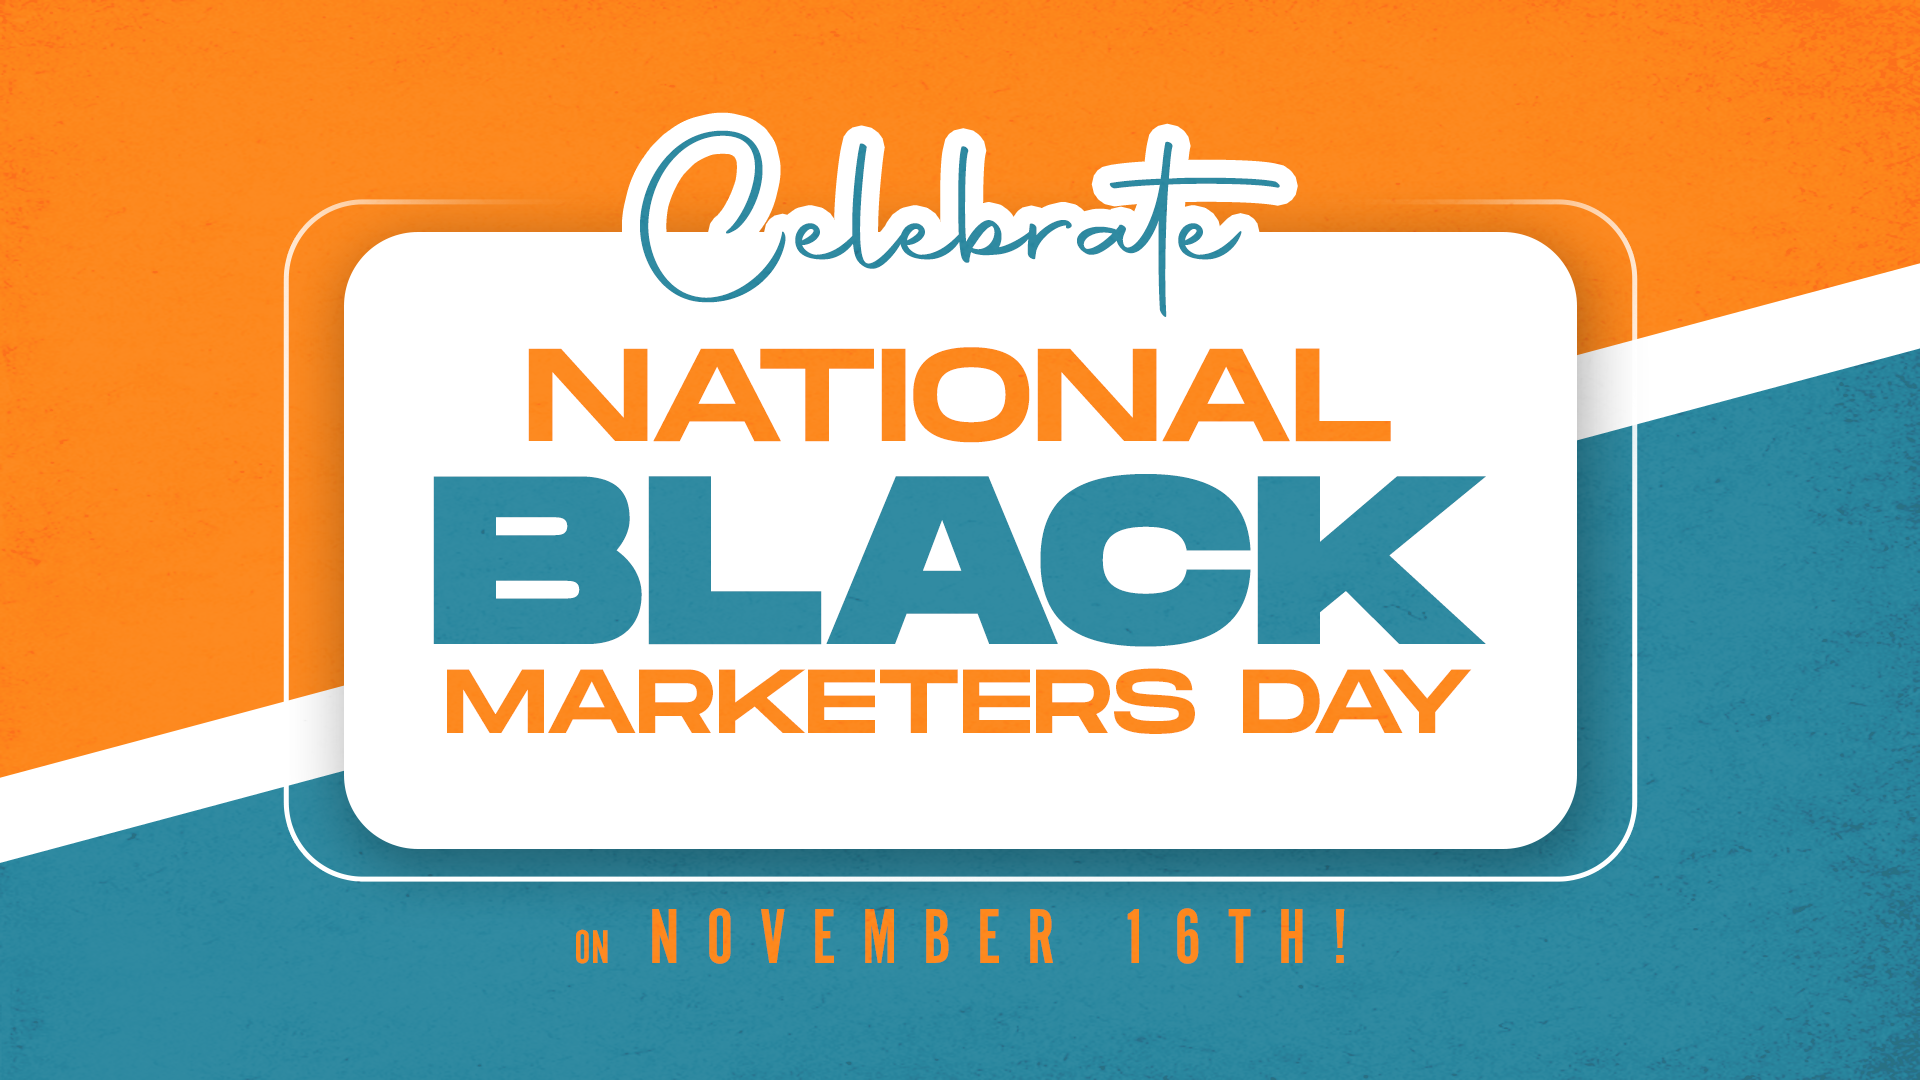 National Black Marketers Day